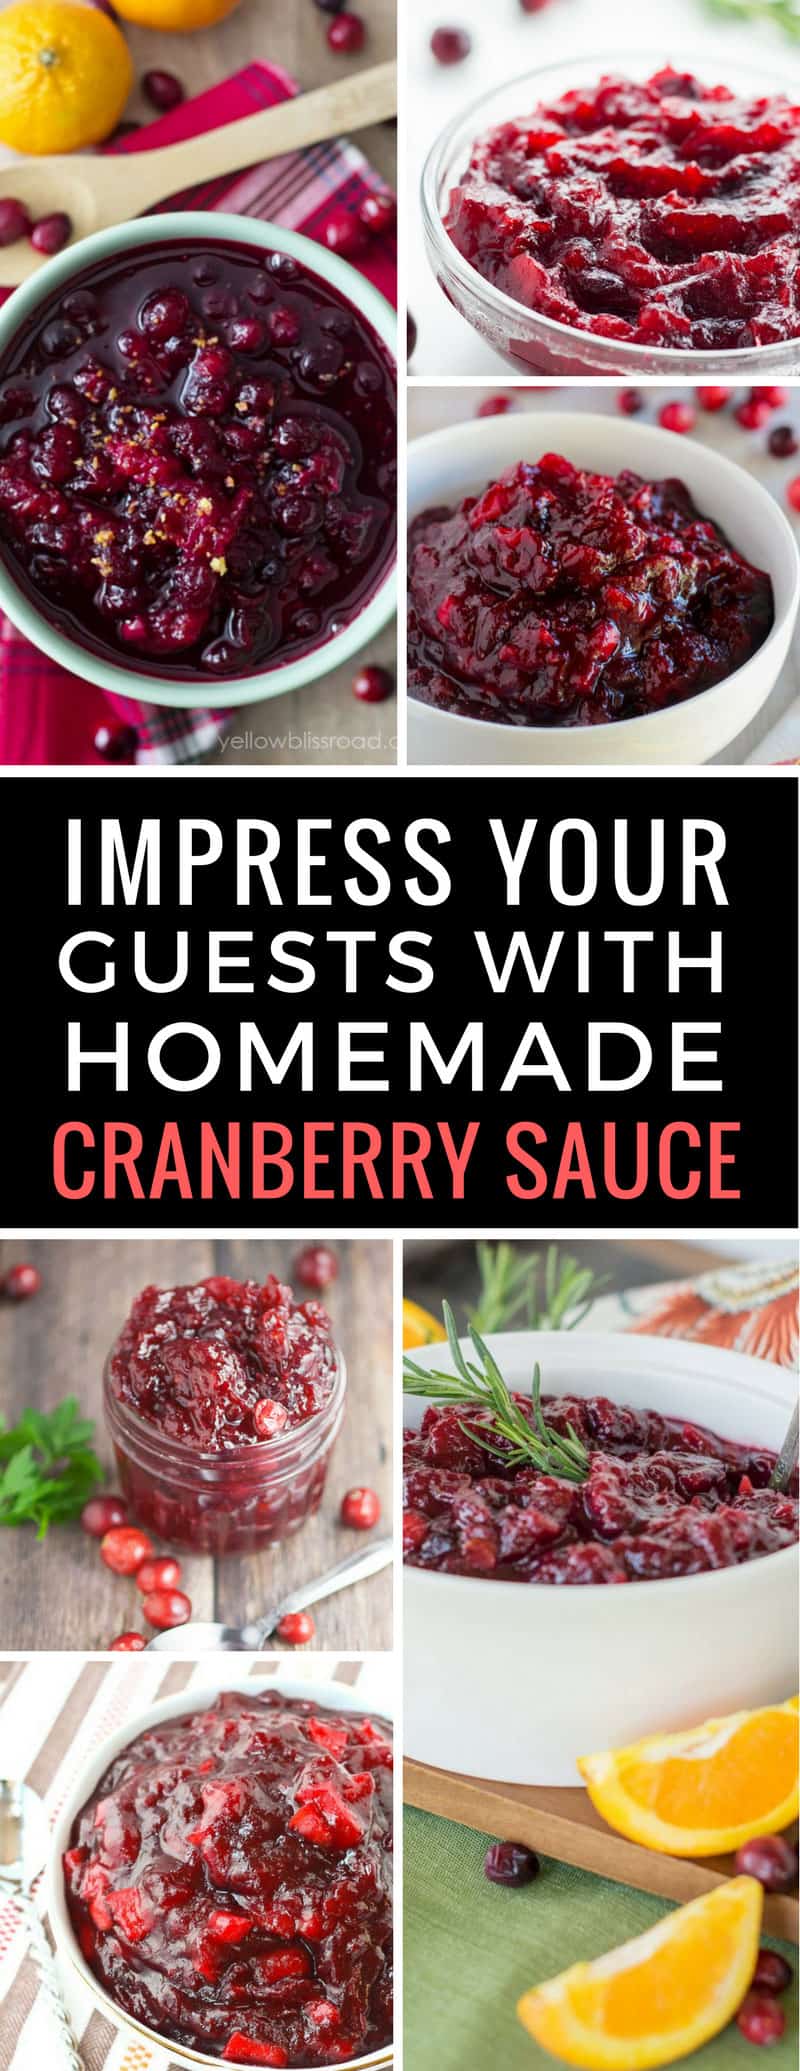 Ready to ditch the can and try a homemade Cranberry Sauce this year? Whether you're preparing for Thanksgiving or Christmas your guests will love any one of these sauces! Click on the image to see the whole collection! | Cranberry Sauce | Thanksgiving | Christmas | Recipes